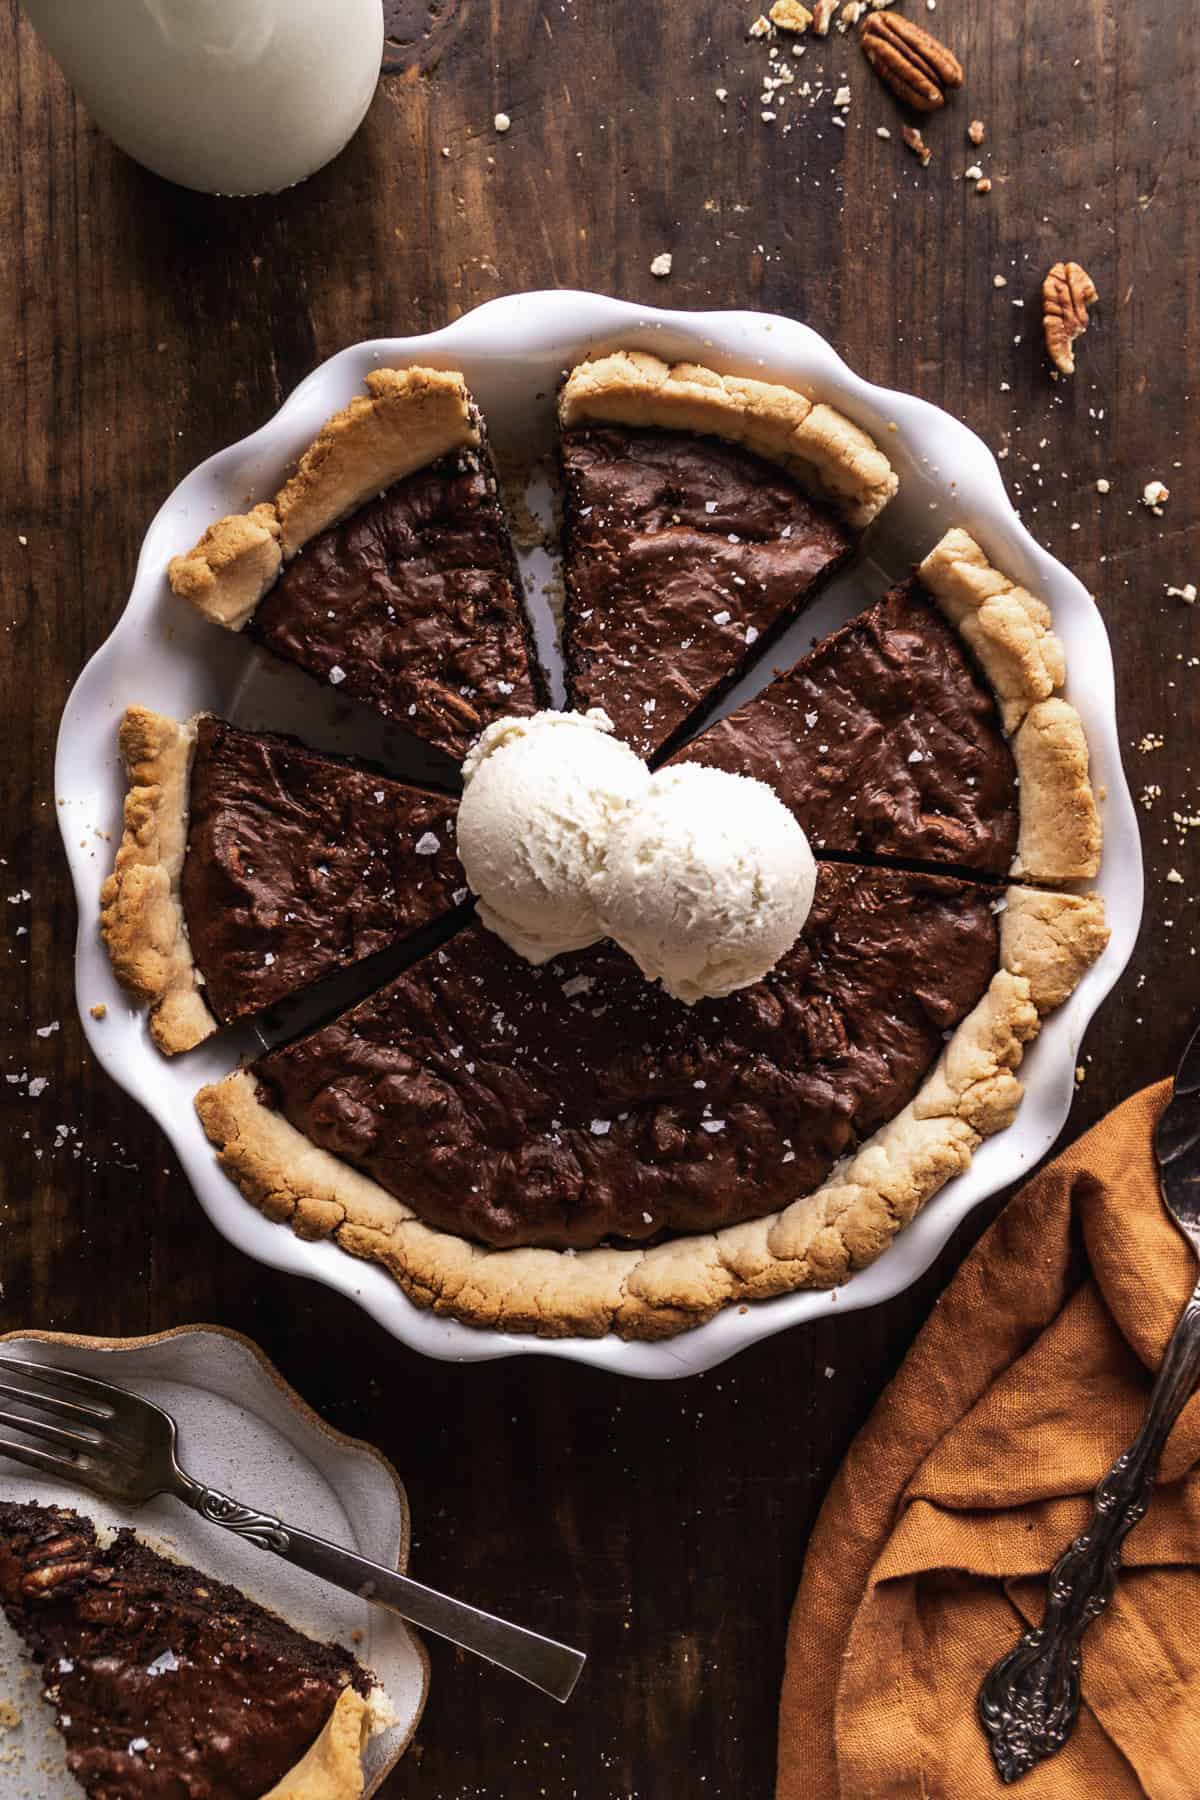 Overhead view of a gluten free chocolate brownie pie with ice cream on top.